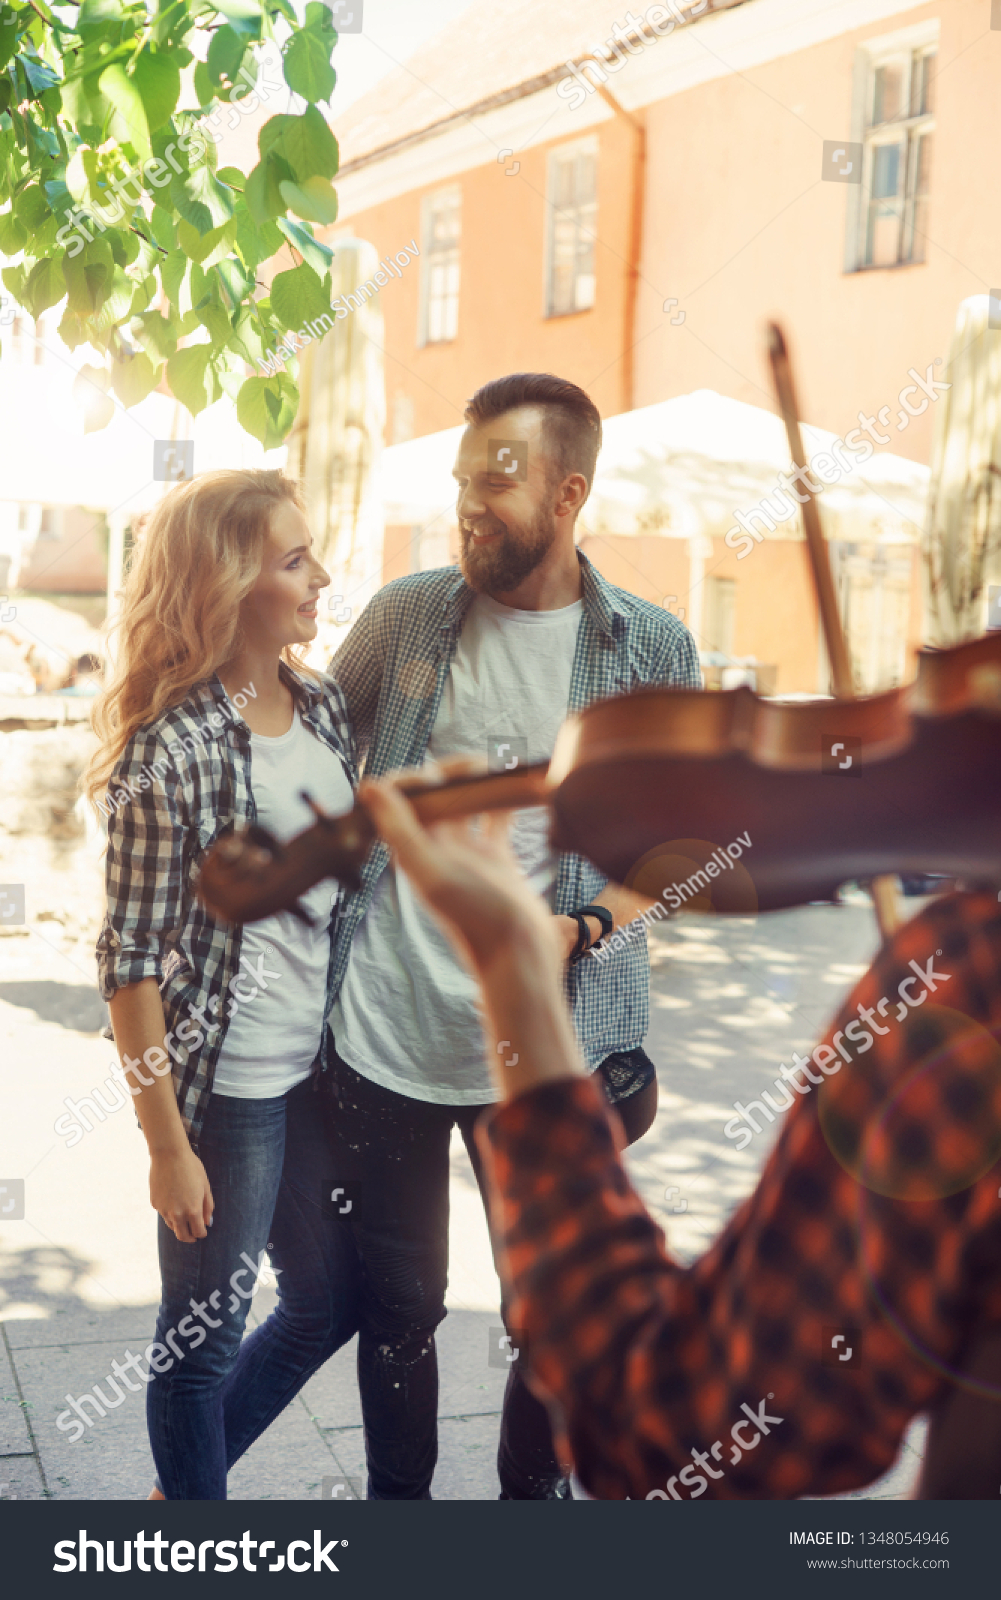 Young loving couple enjoying street musician with a violin #1348054946